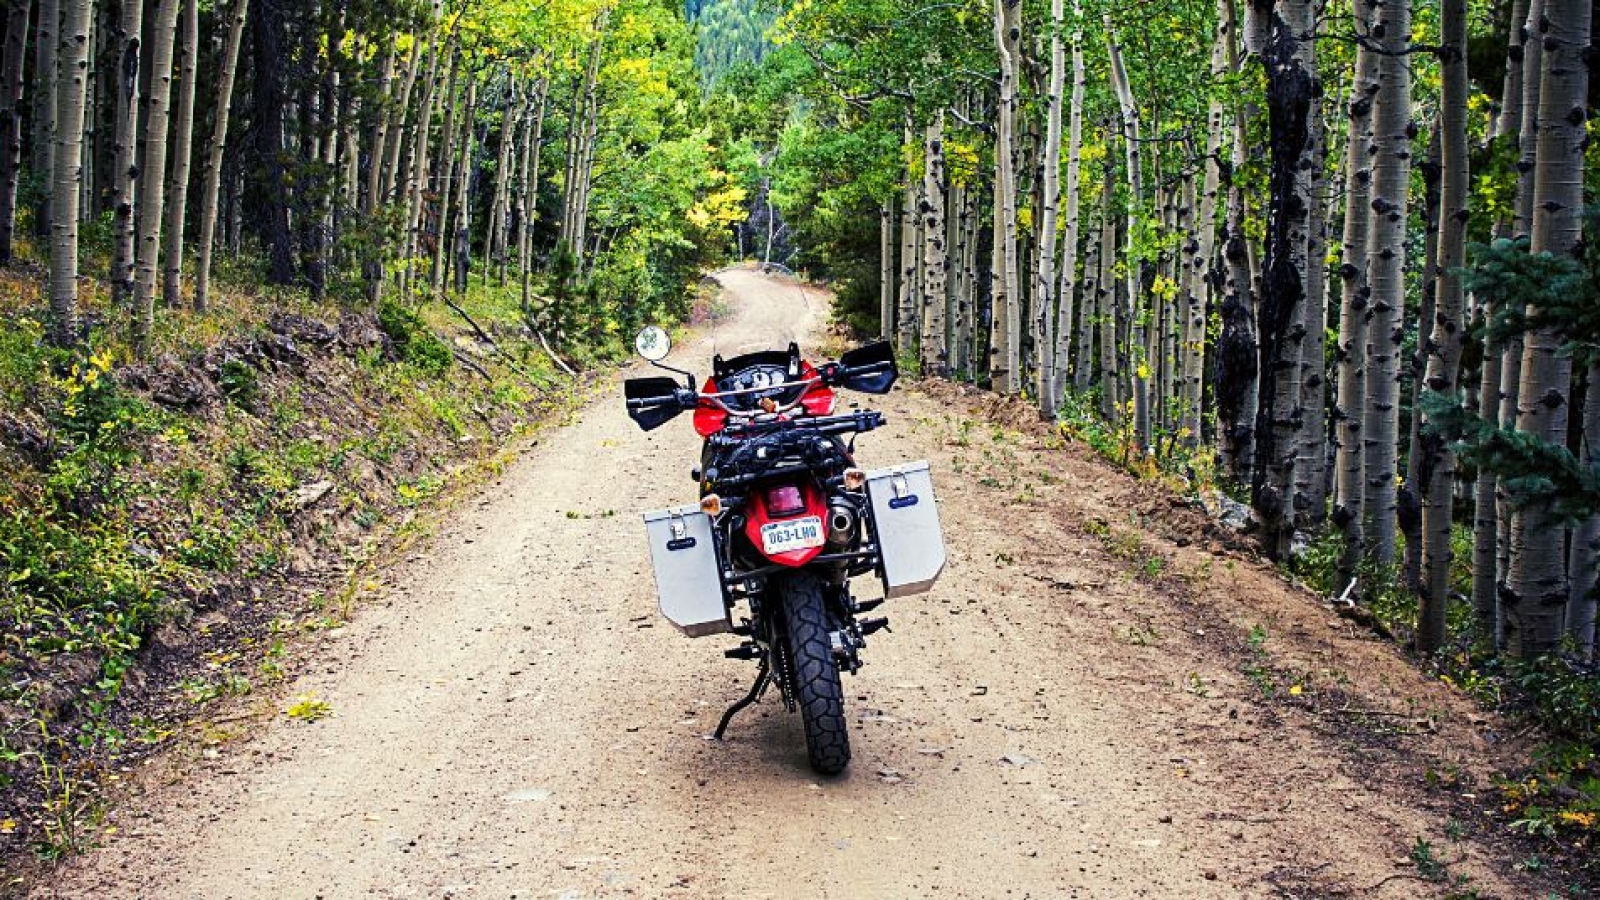 8. Tires tips for adventure and touring bikes